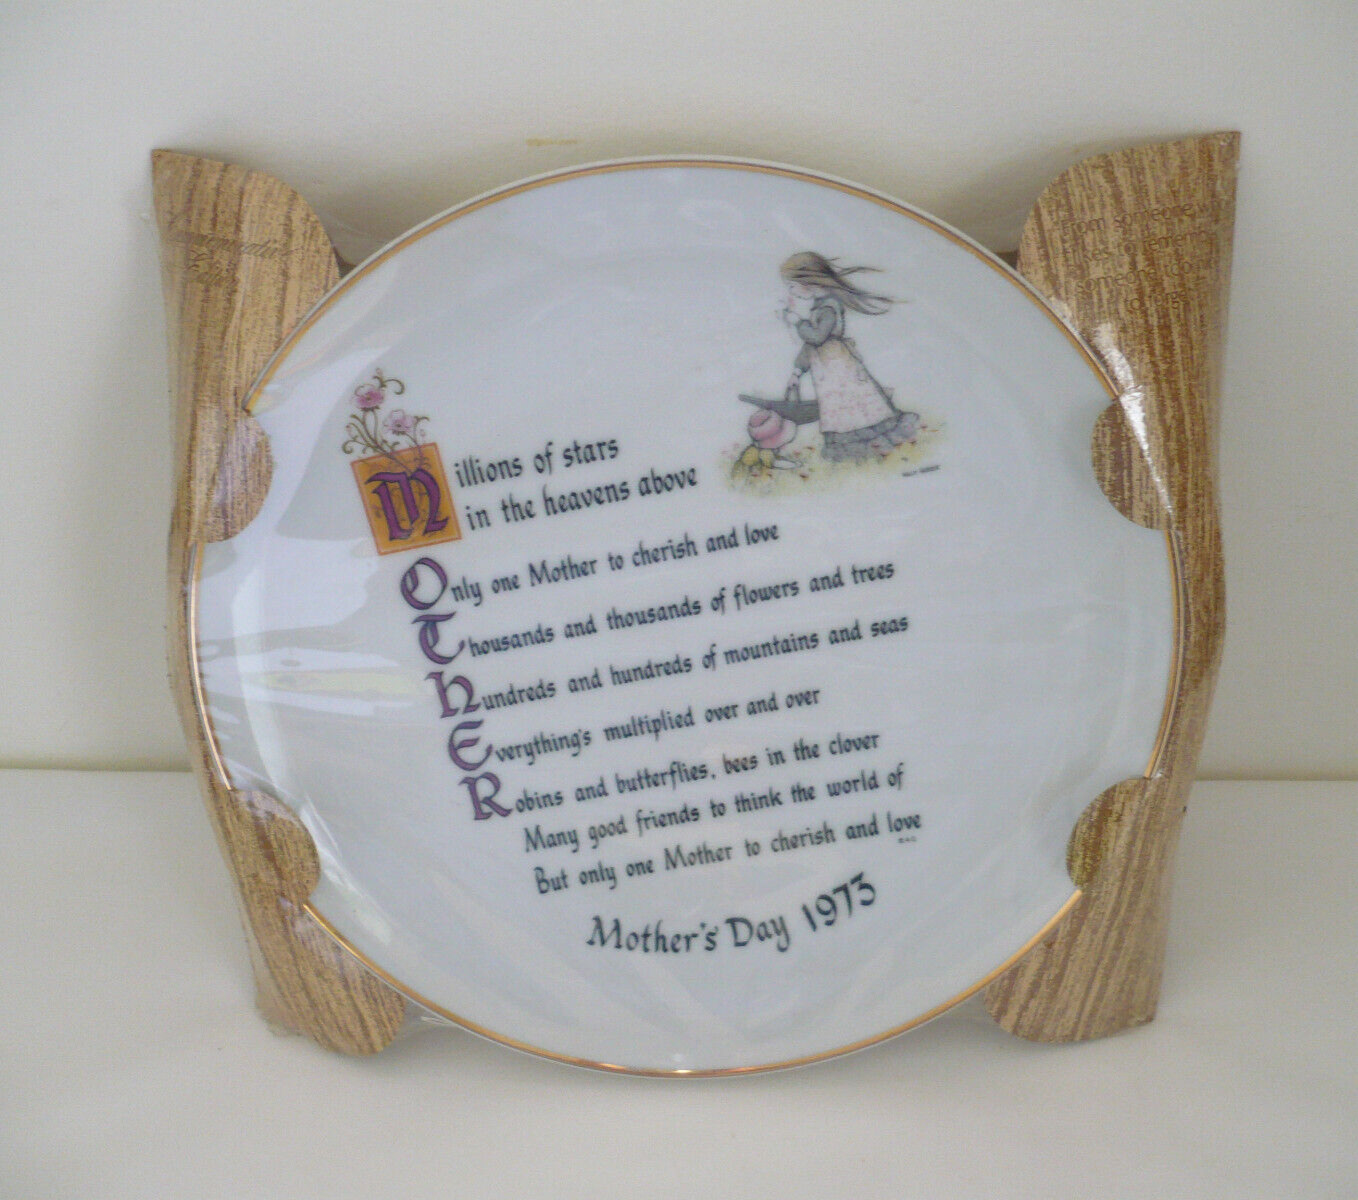 1973 Holly Hobbie Commemorative Edition Mother's Day Plate Sealed Pkg NOS